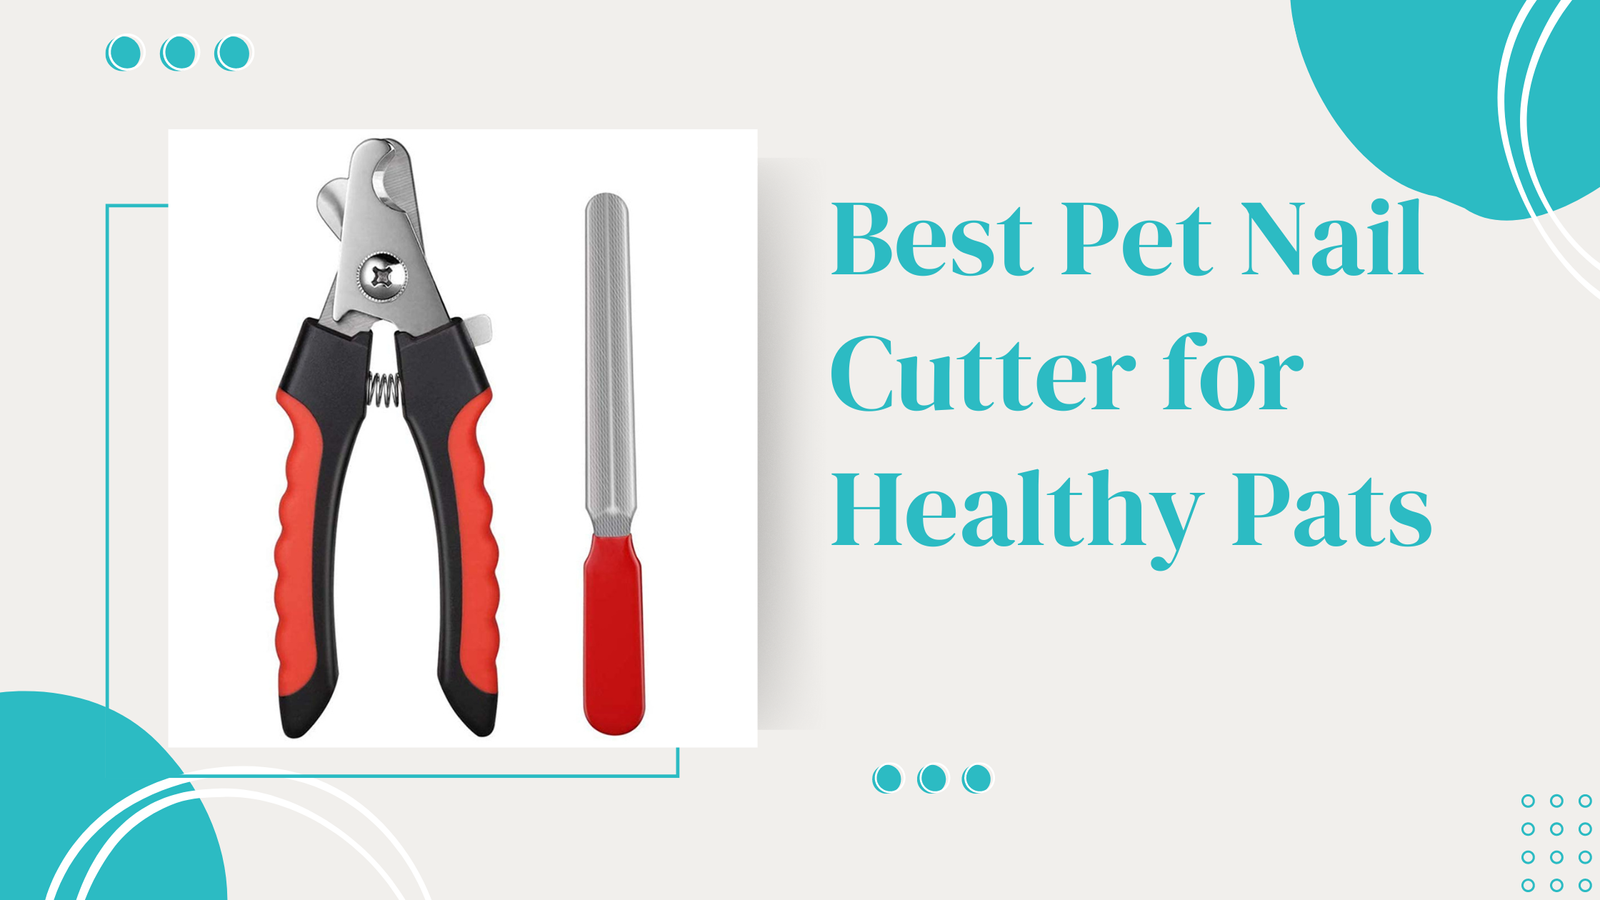 Essential Grooming: The Best Pet Nail Cutter for Healthy Paws